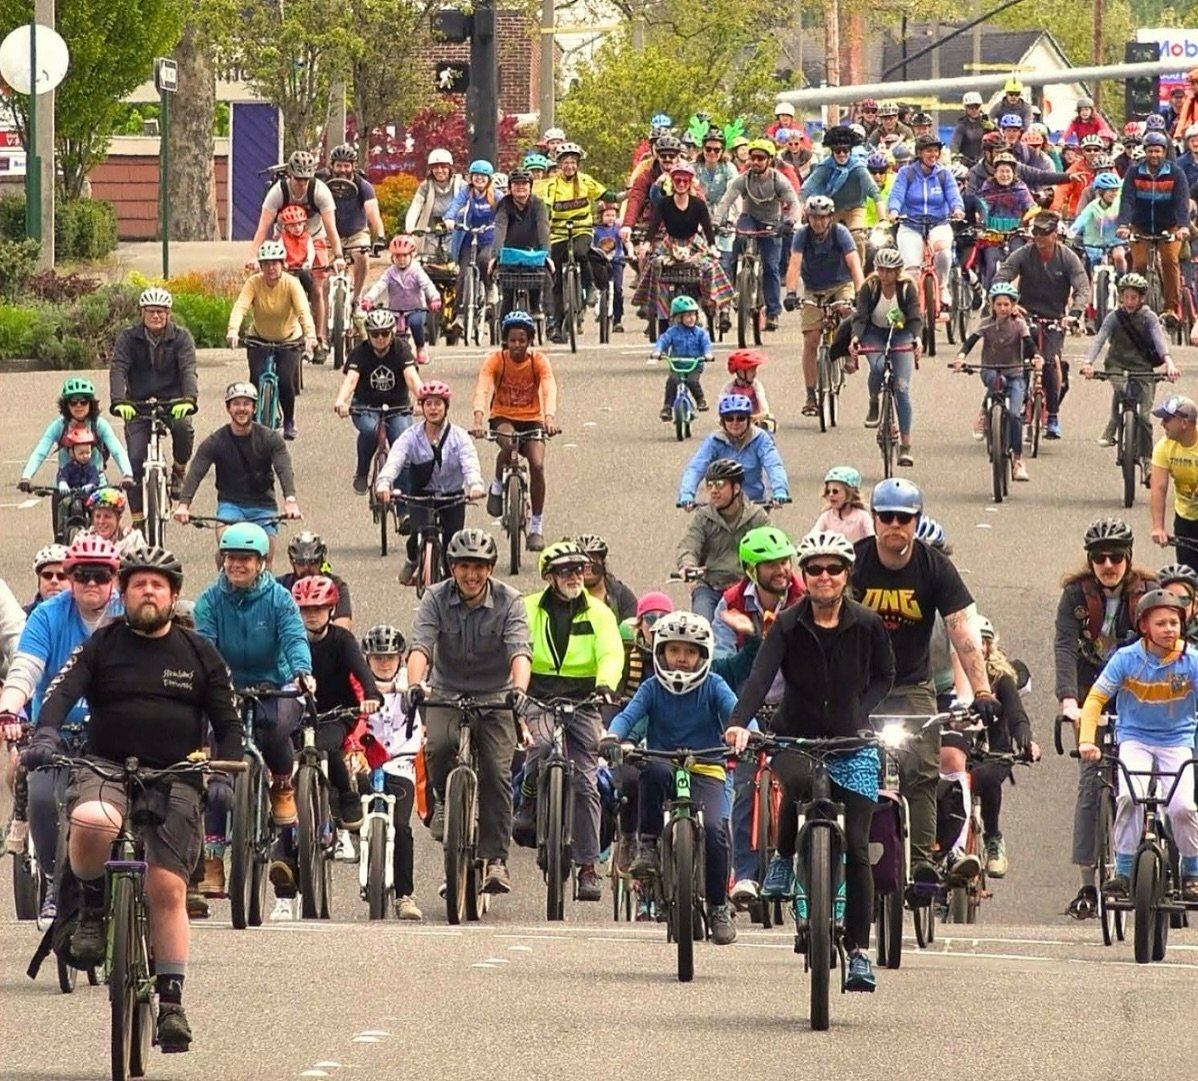 Join us this Sunday for the third annual May Bike Parade!

To participate in the annual May Bike Parade, meet at 2:00 p.m. on Jersey Street, between E. Holly St and E. Chestnut St. Together we will ride down Holly Street to Waypoint Park.
The ride wi